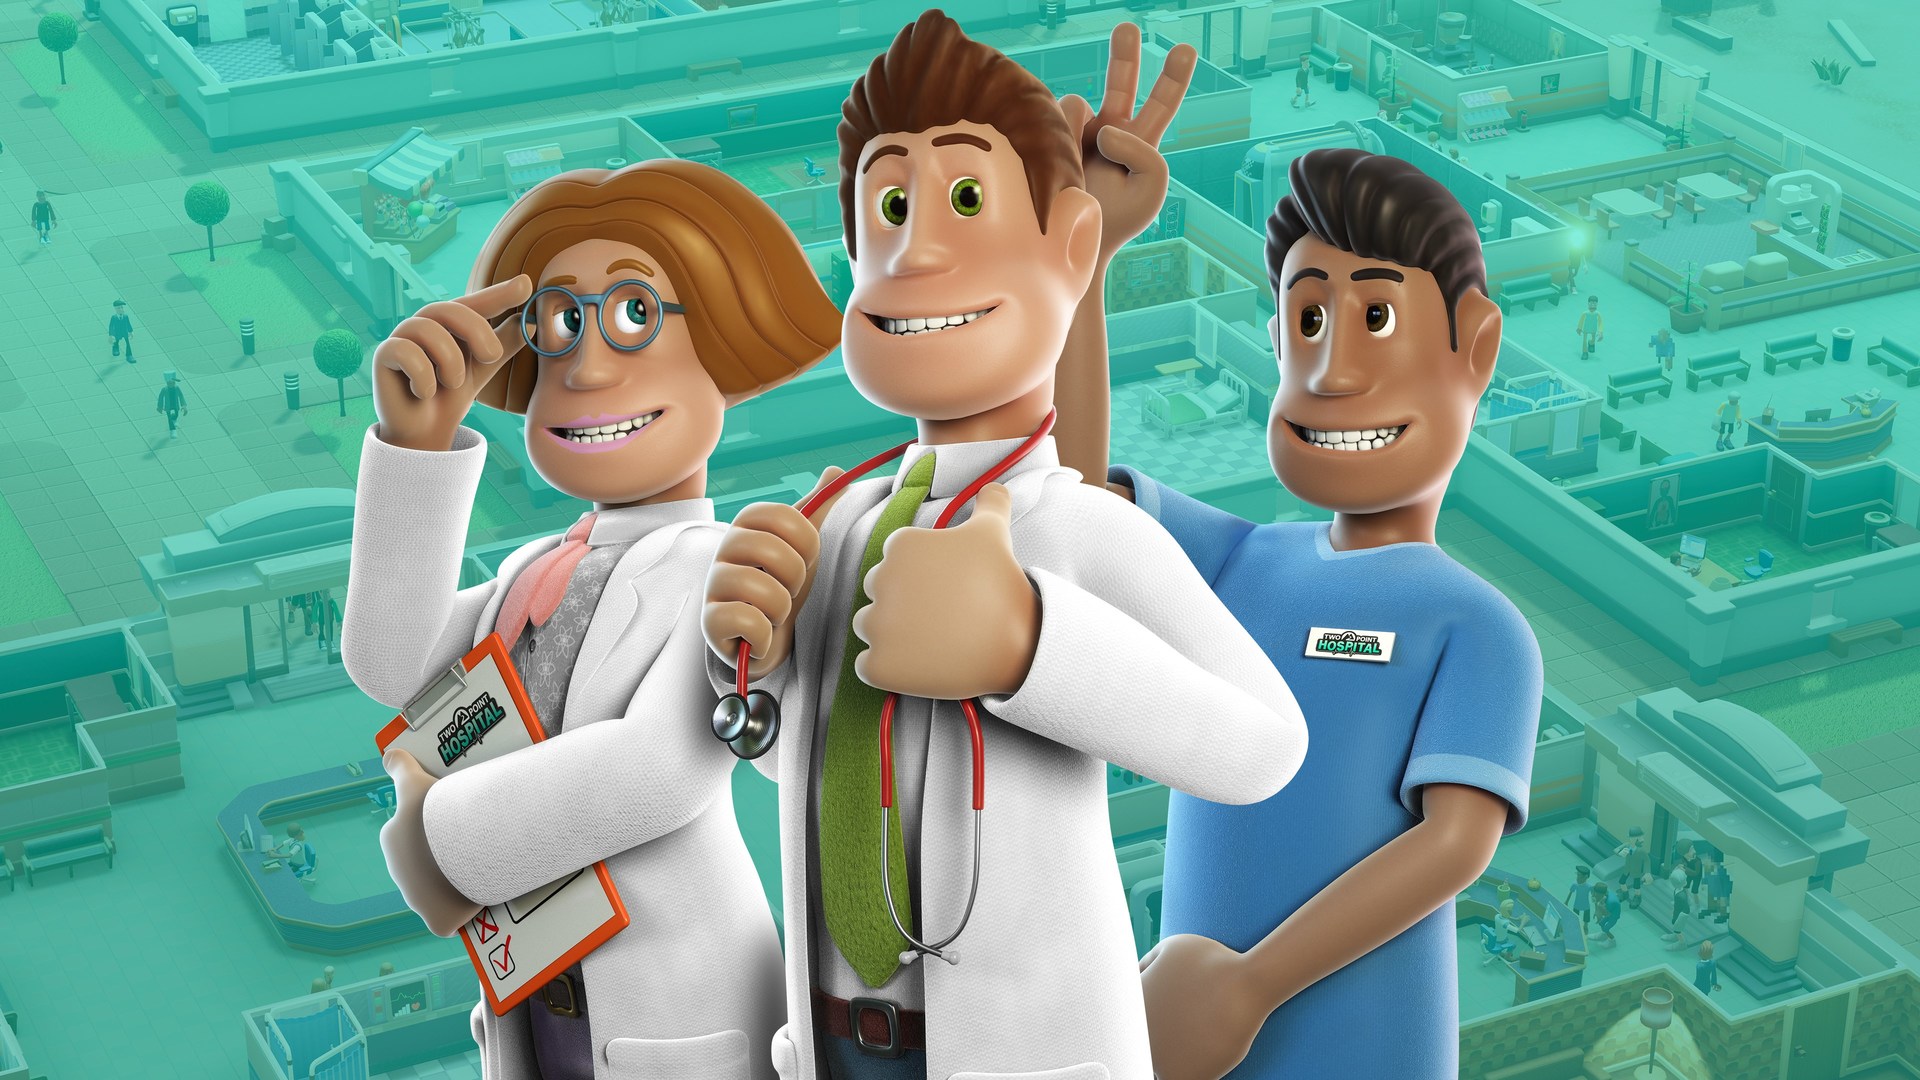 two point hospital steam download